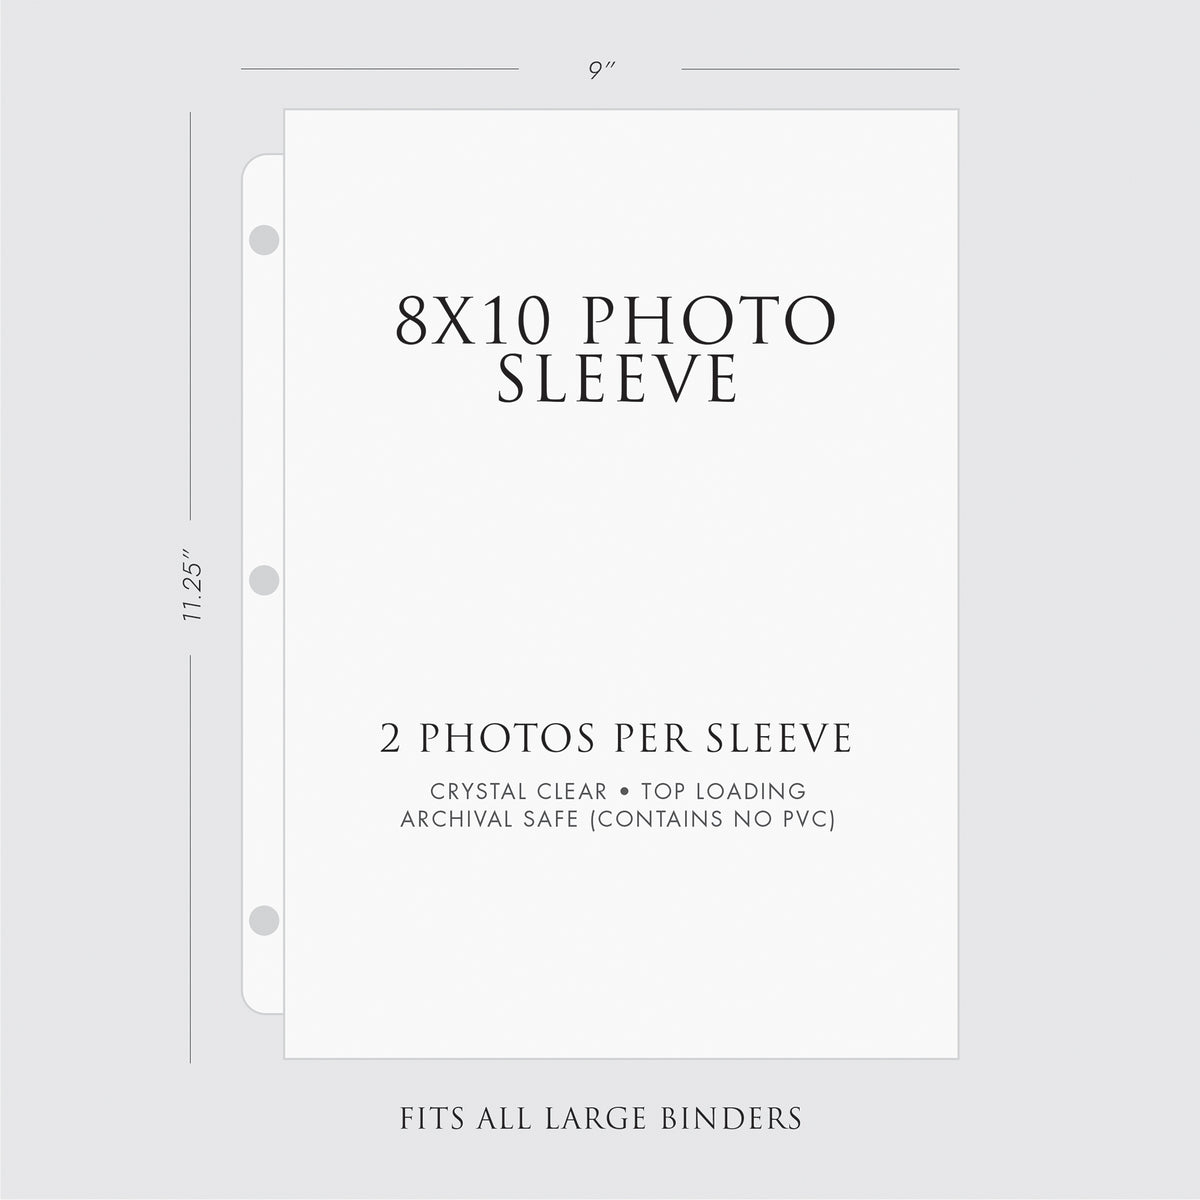 Large Photo Binder | for 8x10 Photos | with Terra Cotta Vegan Leather Cover